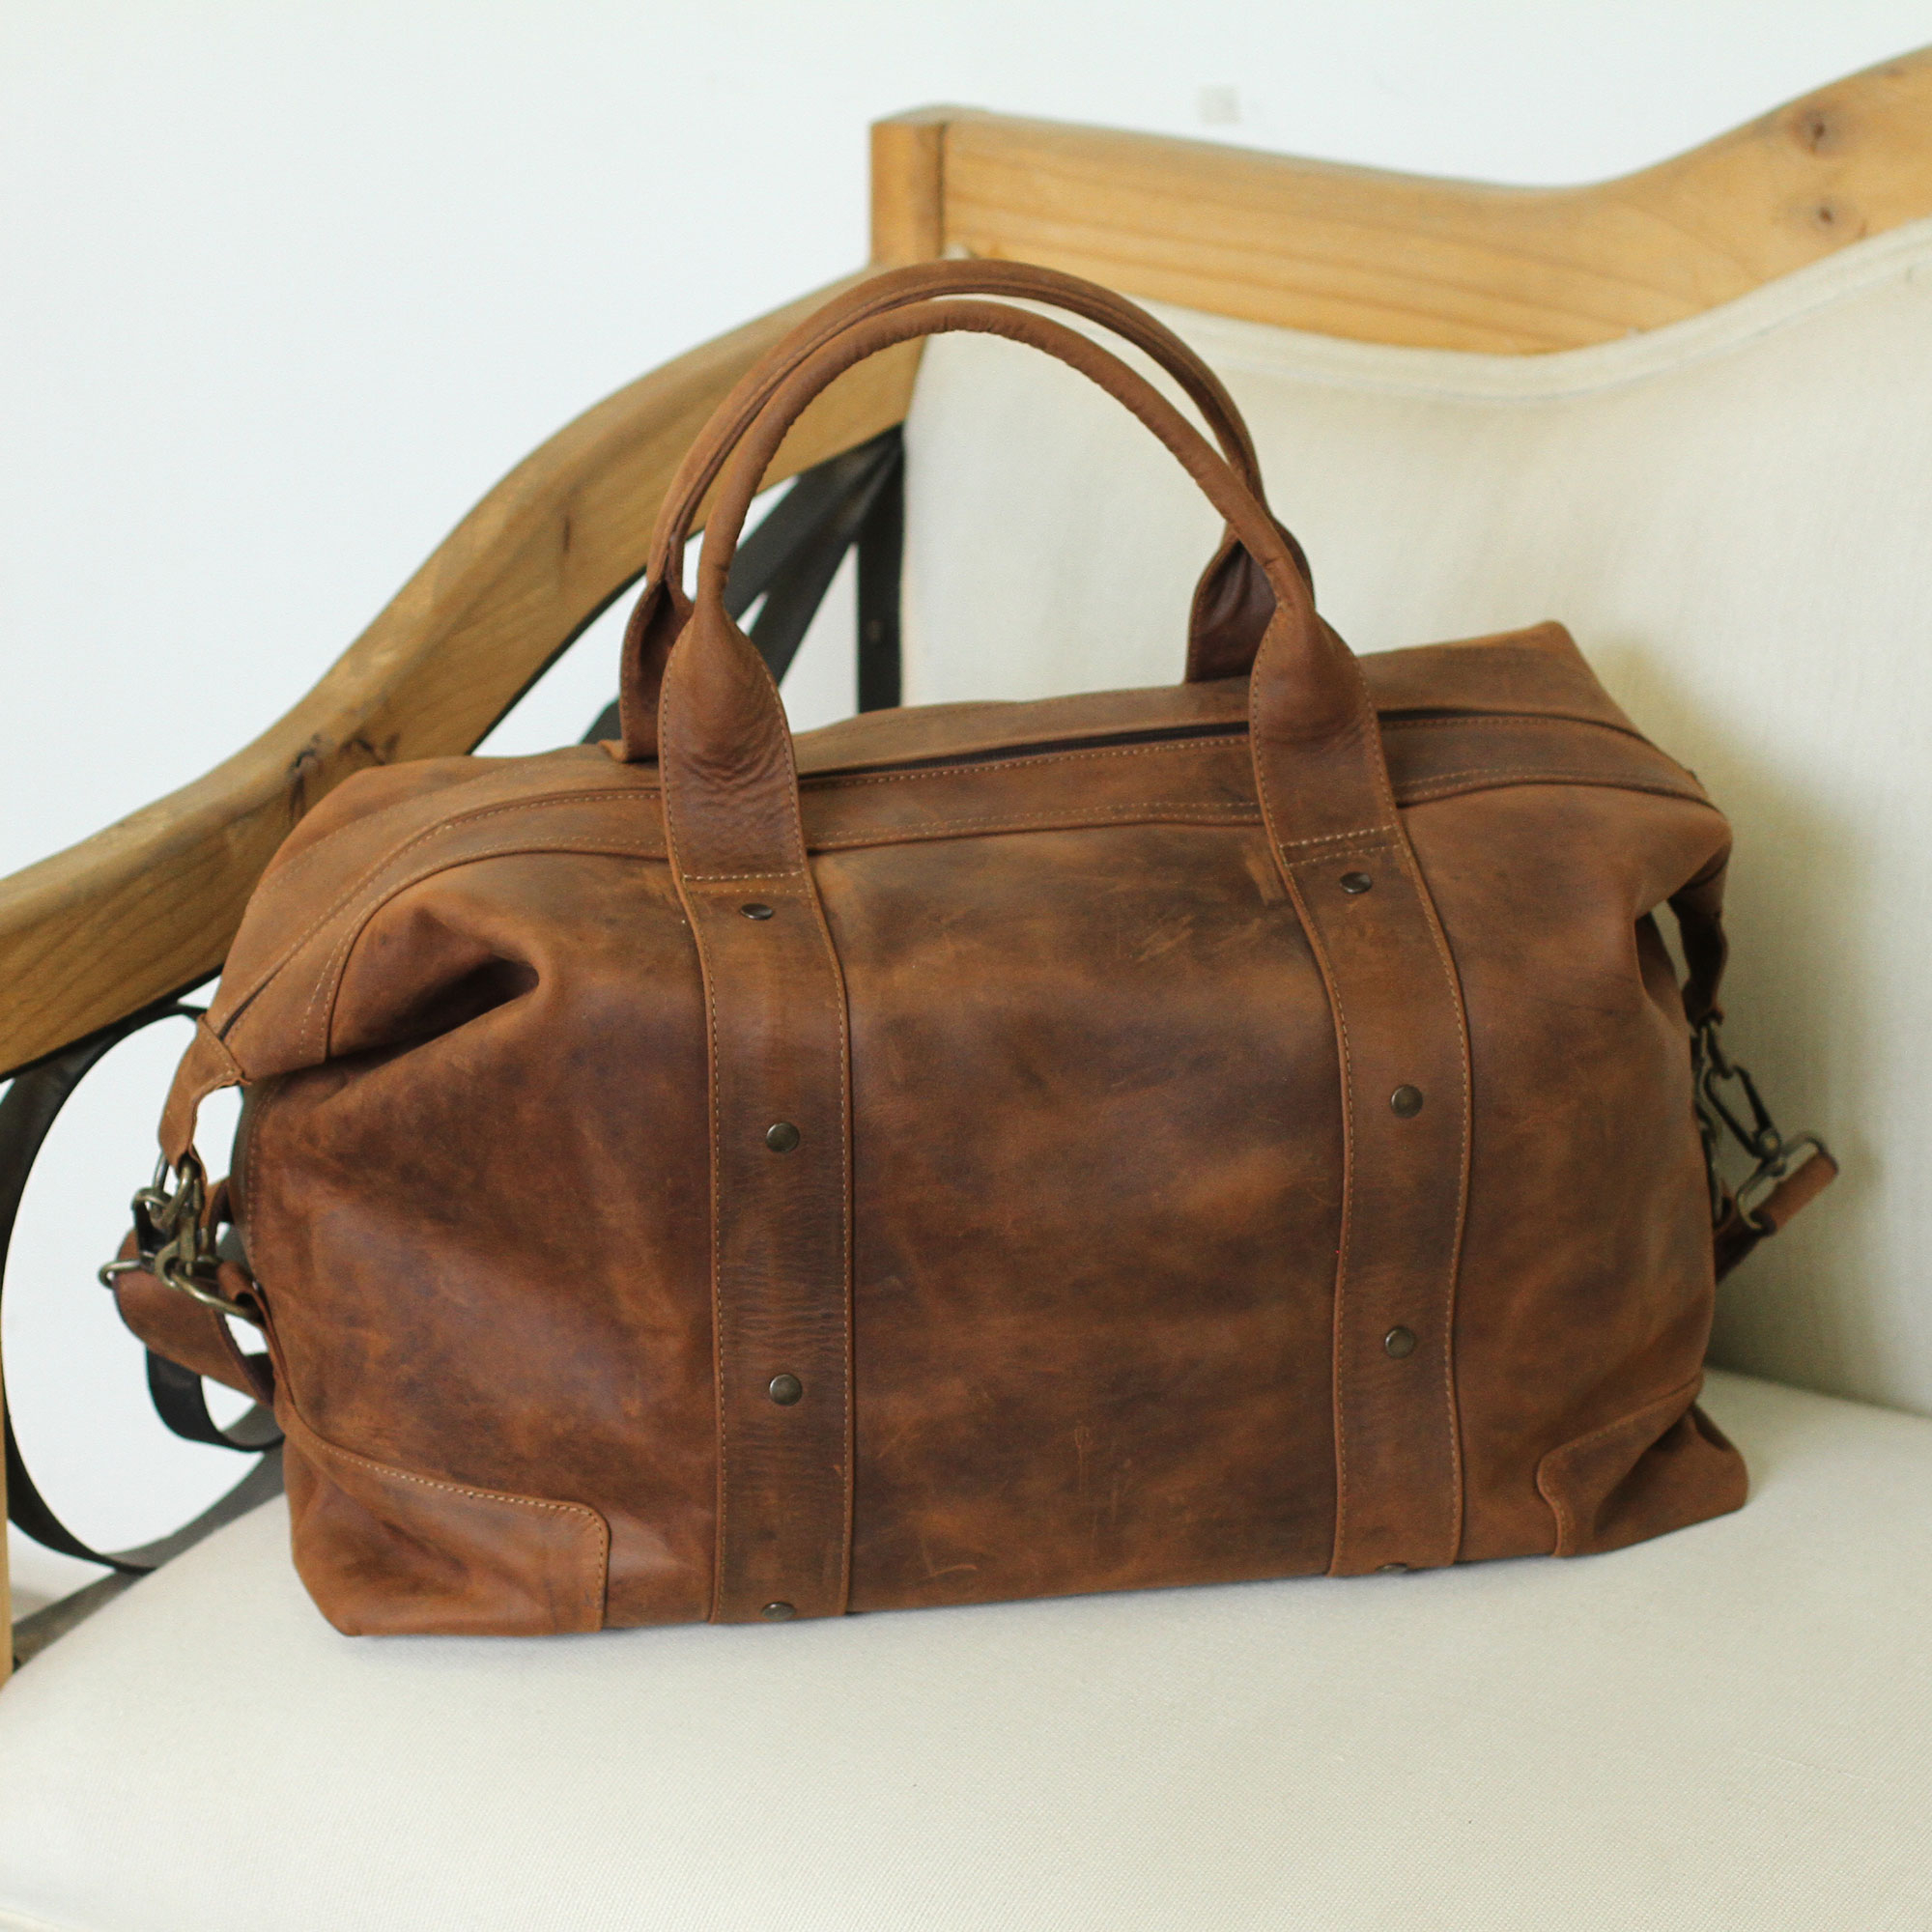 Handcrafted Rugged Brown Leather Overnight Bag - Overnighter | NOVICA